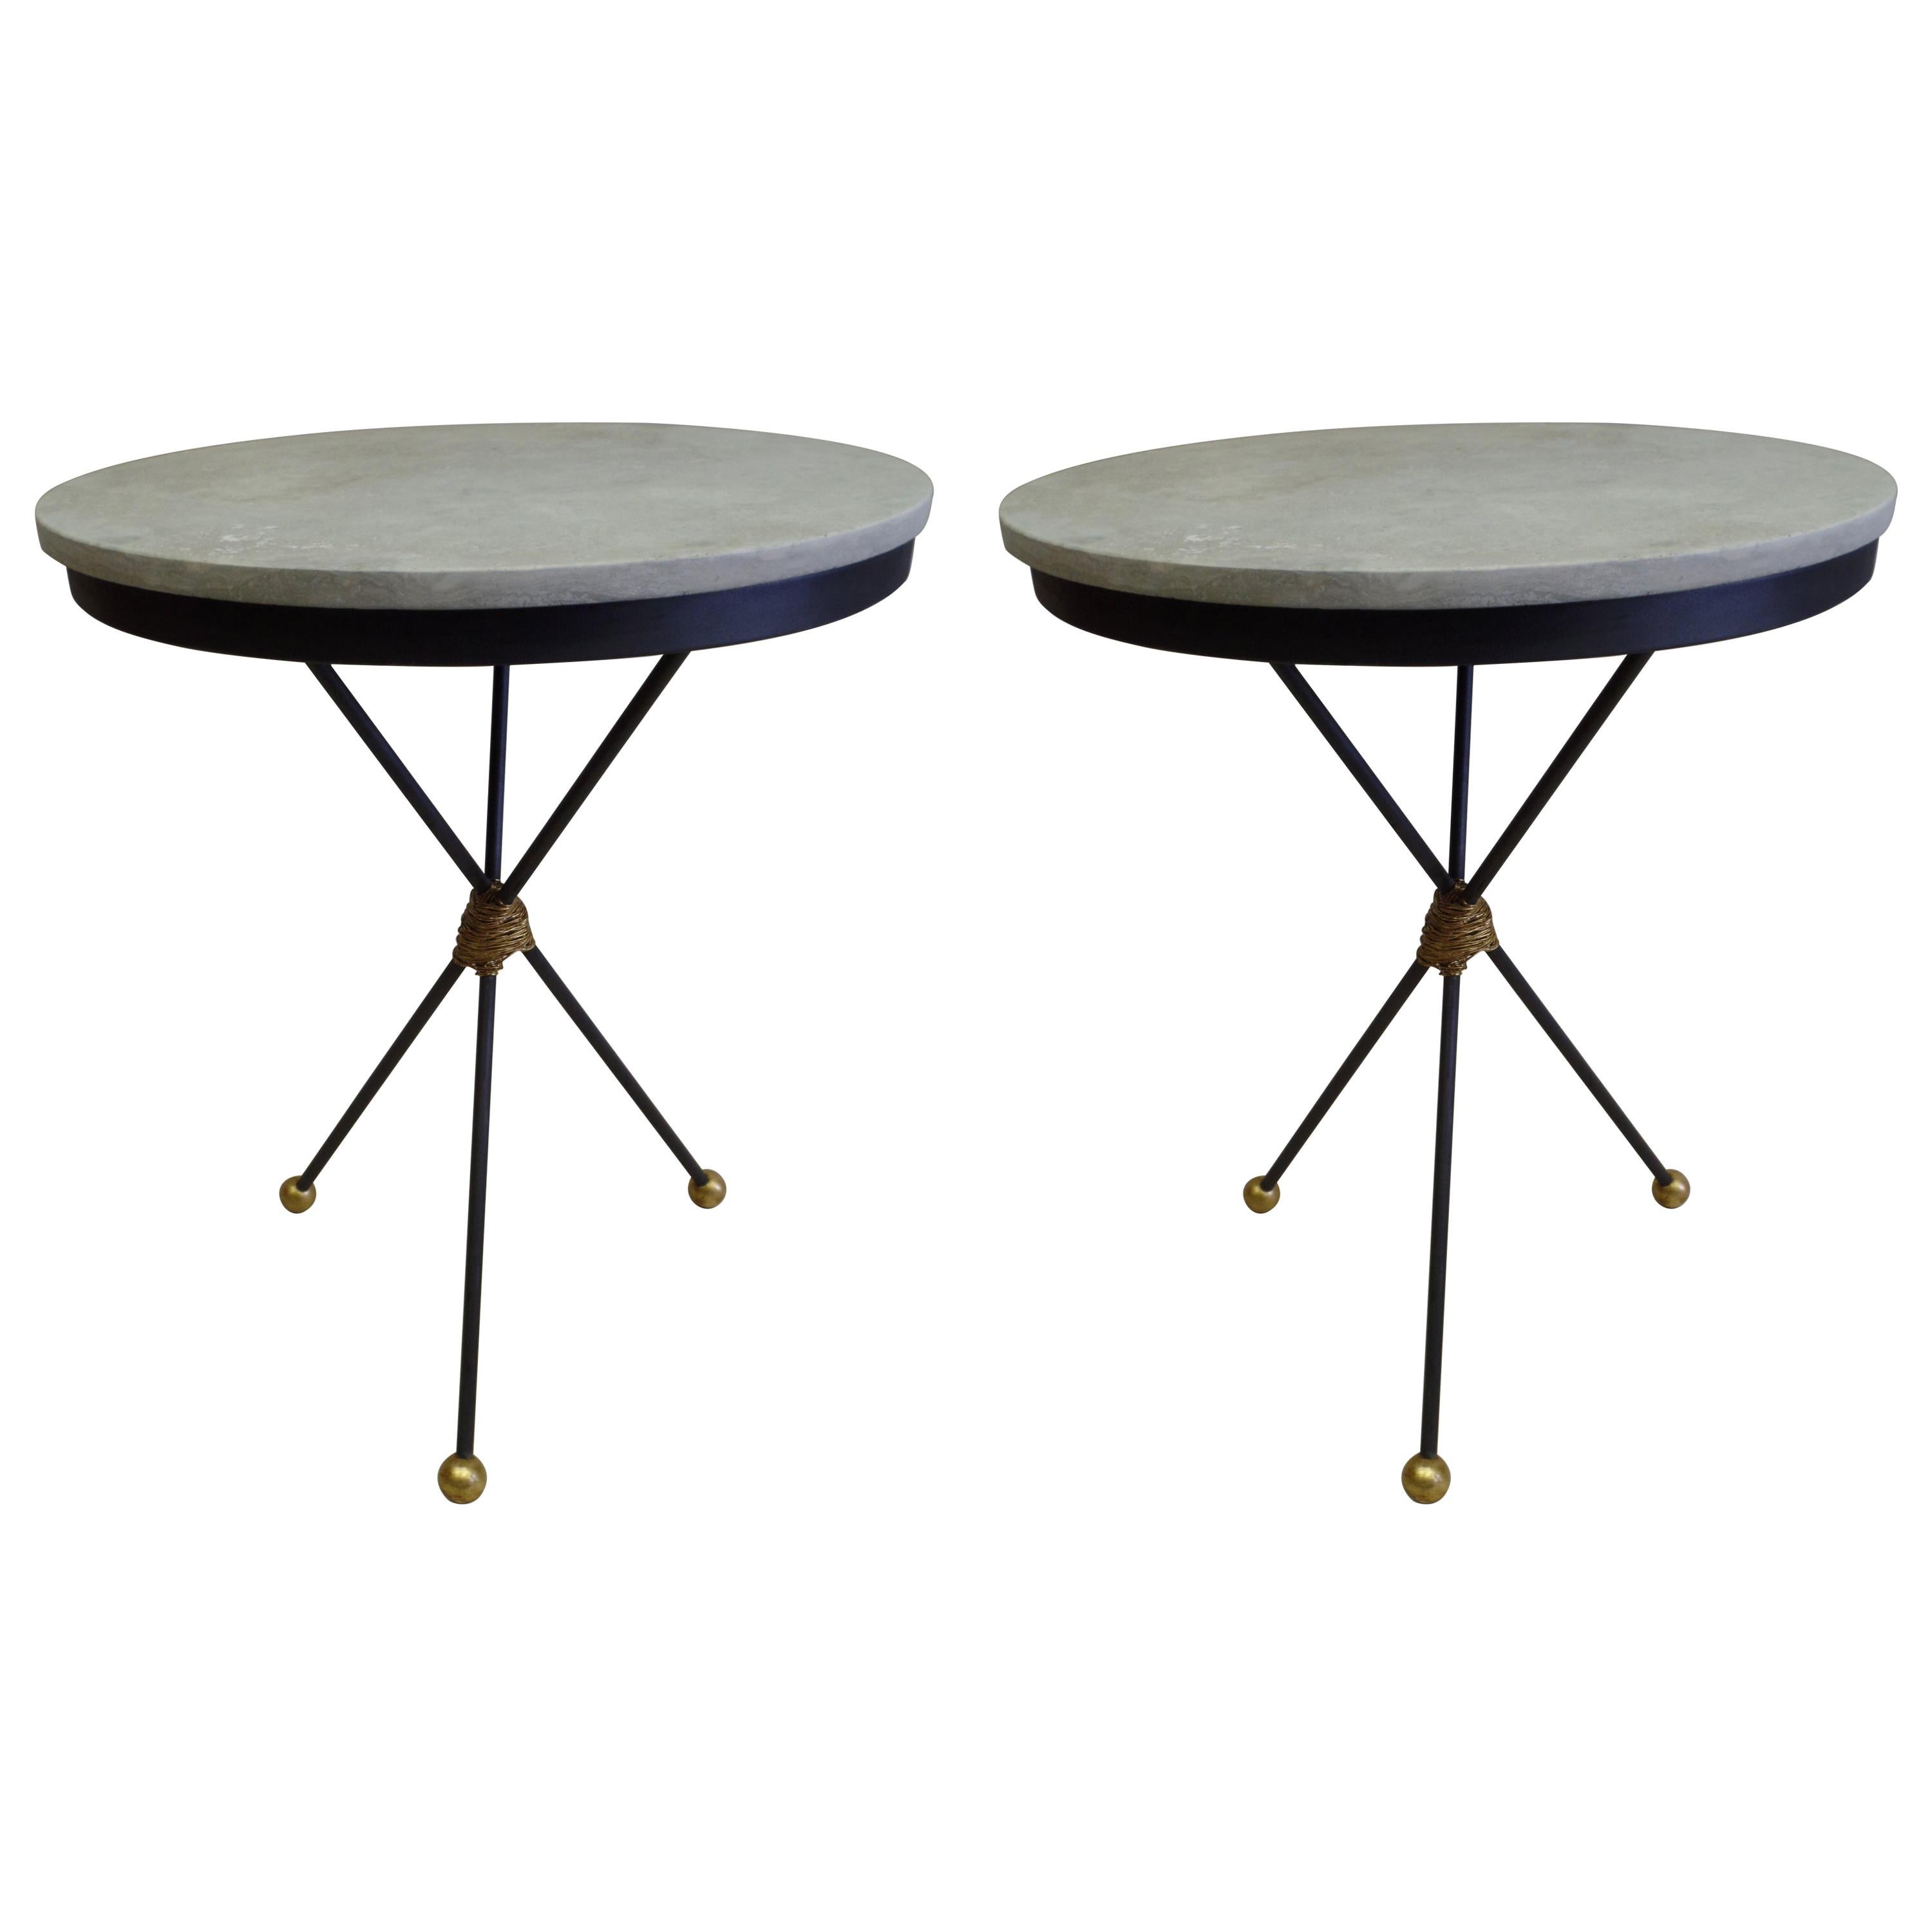 Elegant Pair of French Mid-Century Modern Neoclassical partially gilt wrought iron tables in the style of Gilbert Poillerat. The tables have silver-grey travertine tops supported by a tripod base ending with three gilt iron ball feet. The size of